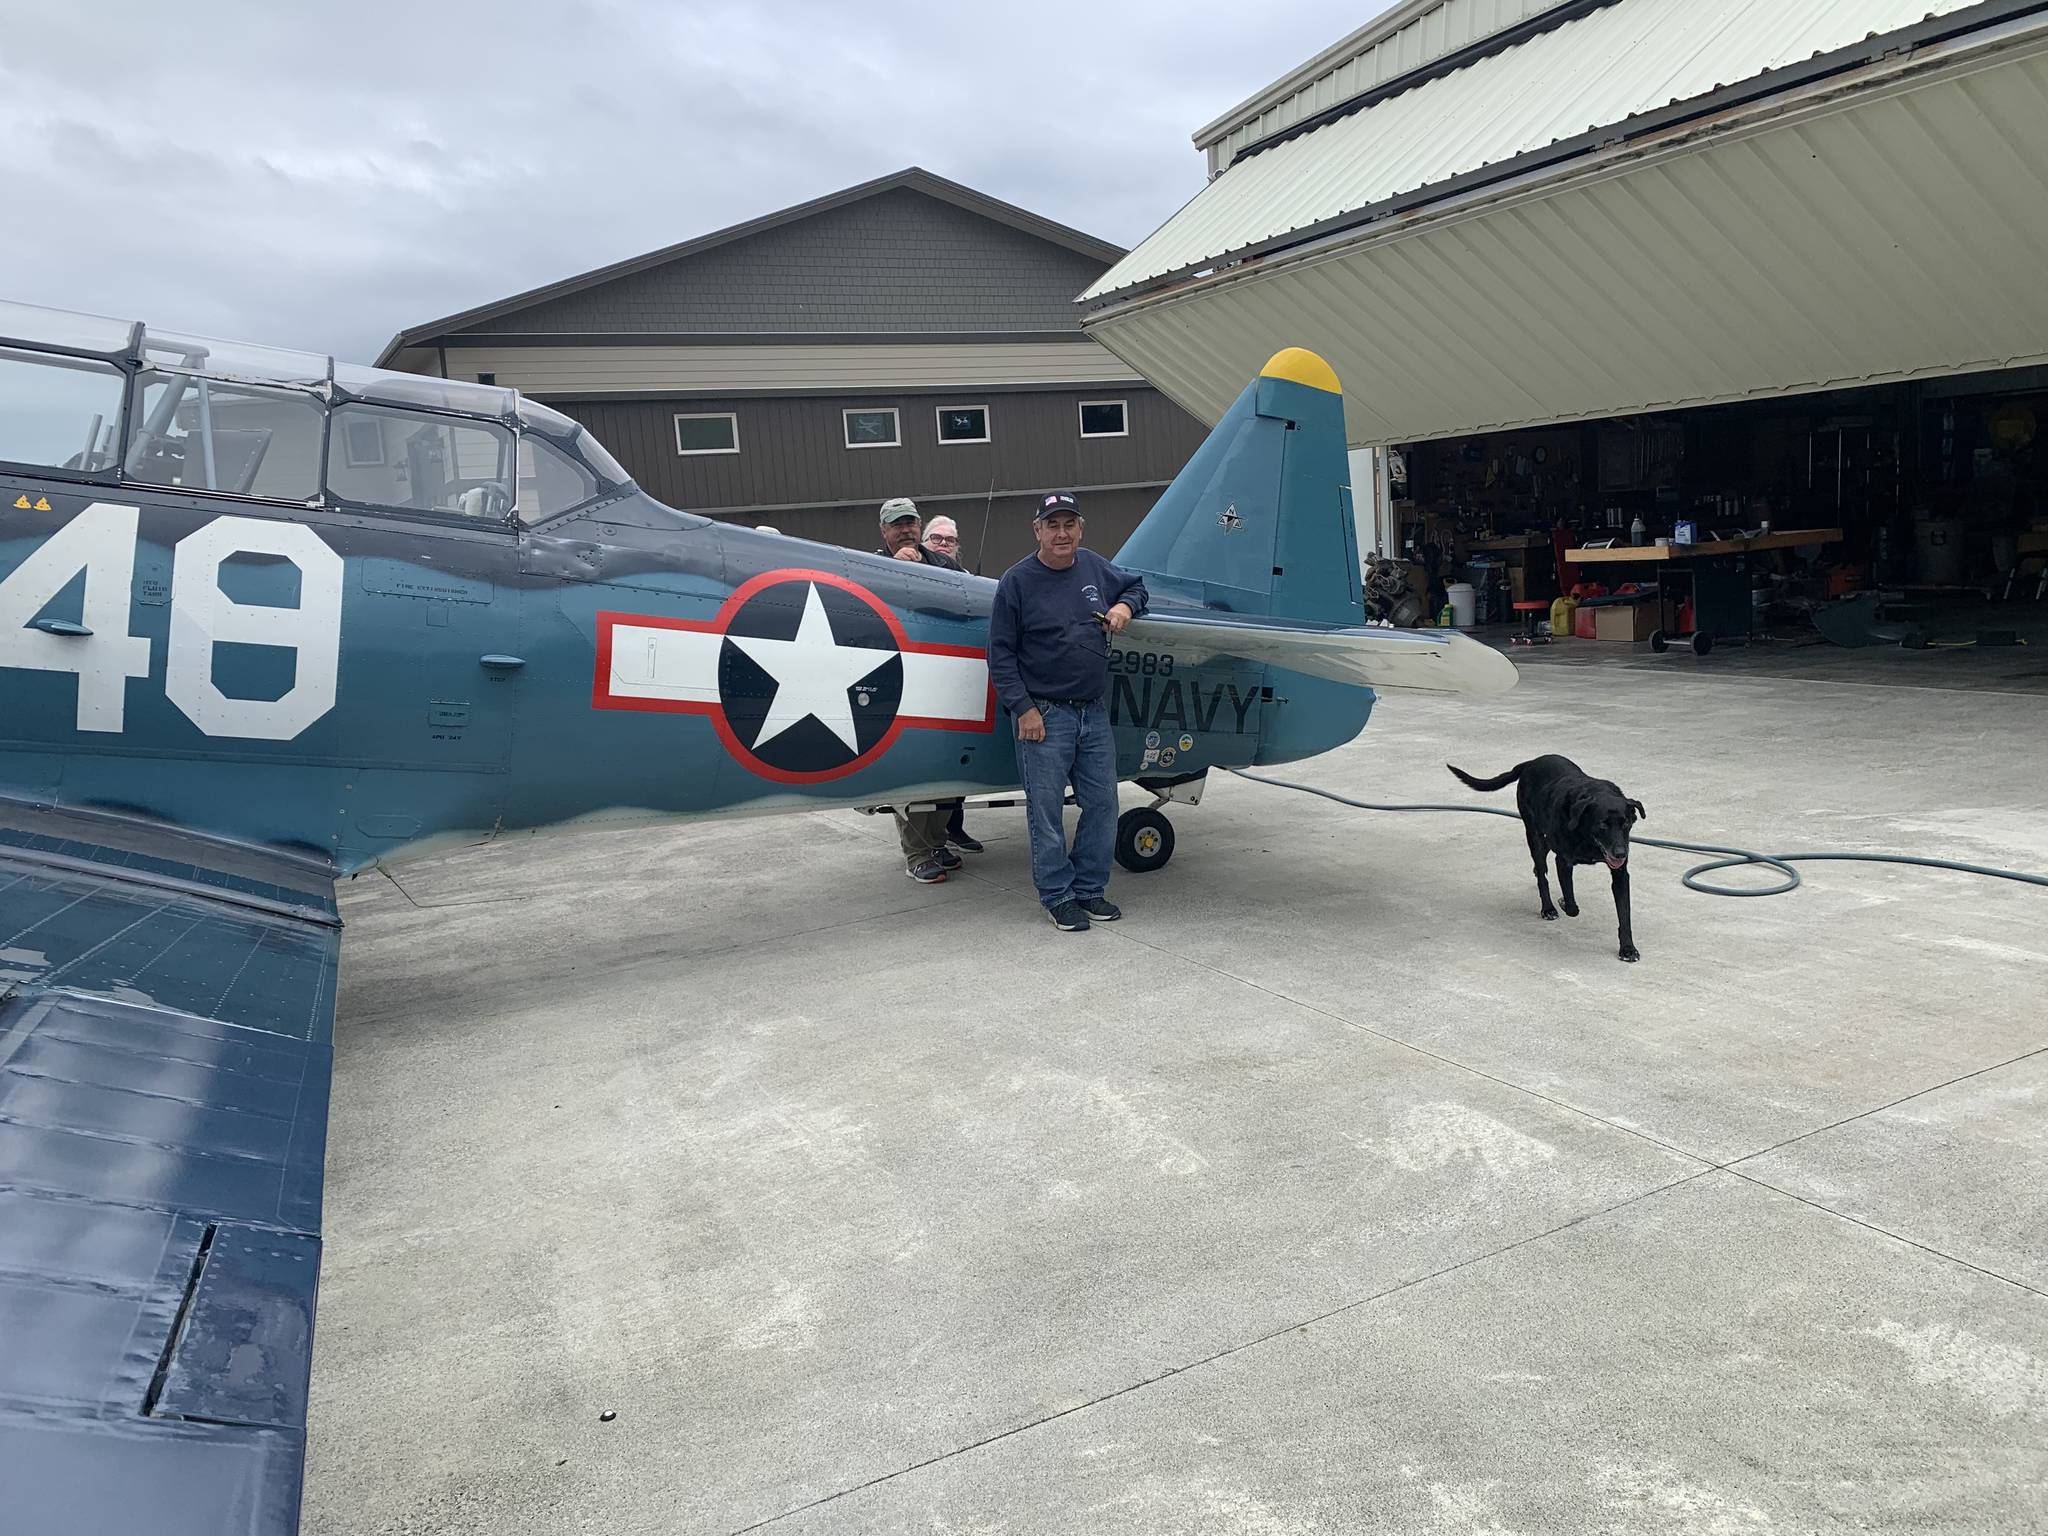 John Johnson, on left, with his wife Susie and crew chief Dave Richardson, and dog Kona, stand next to John’s T-6 Texan that he and Richardson will travel with on an aircraft to Hawaii and fly to commemorate the end of World War II 75 years ago. Photo courtesy of Kaye Gagnon